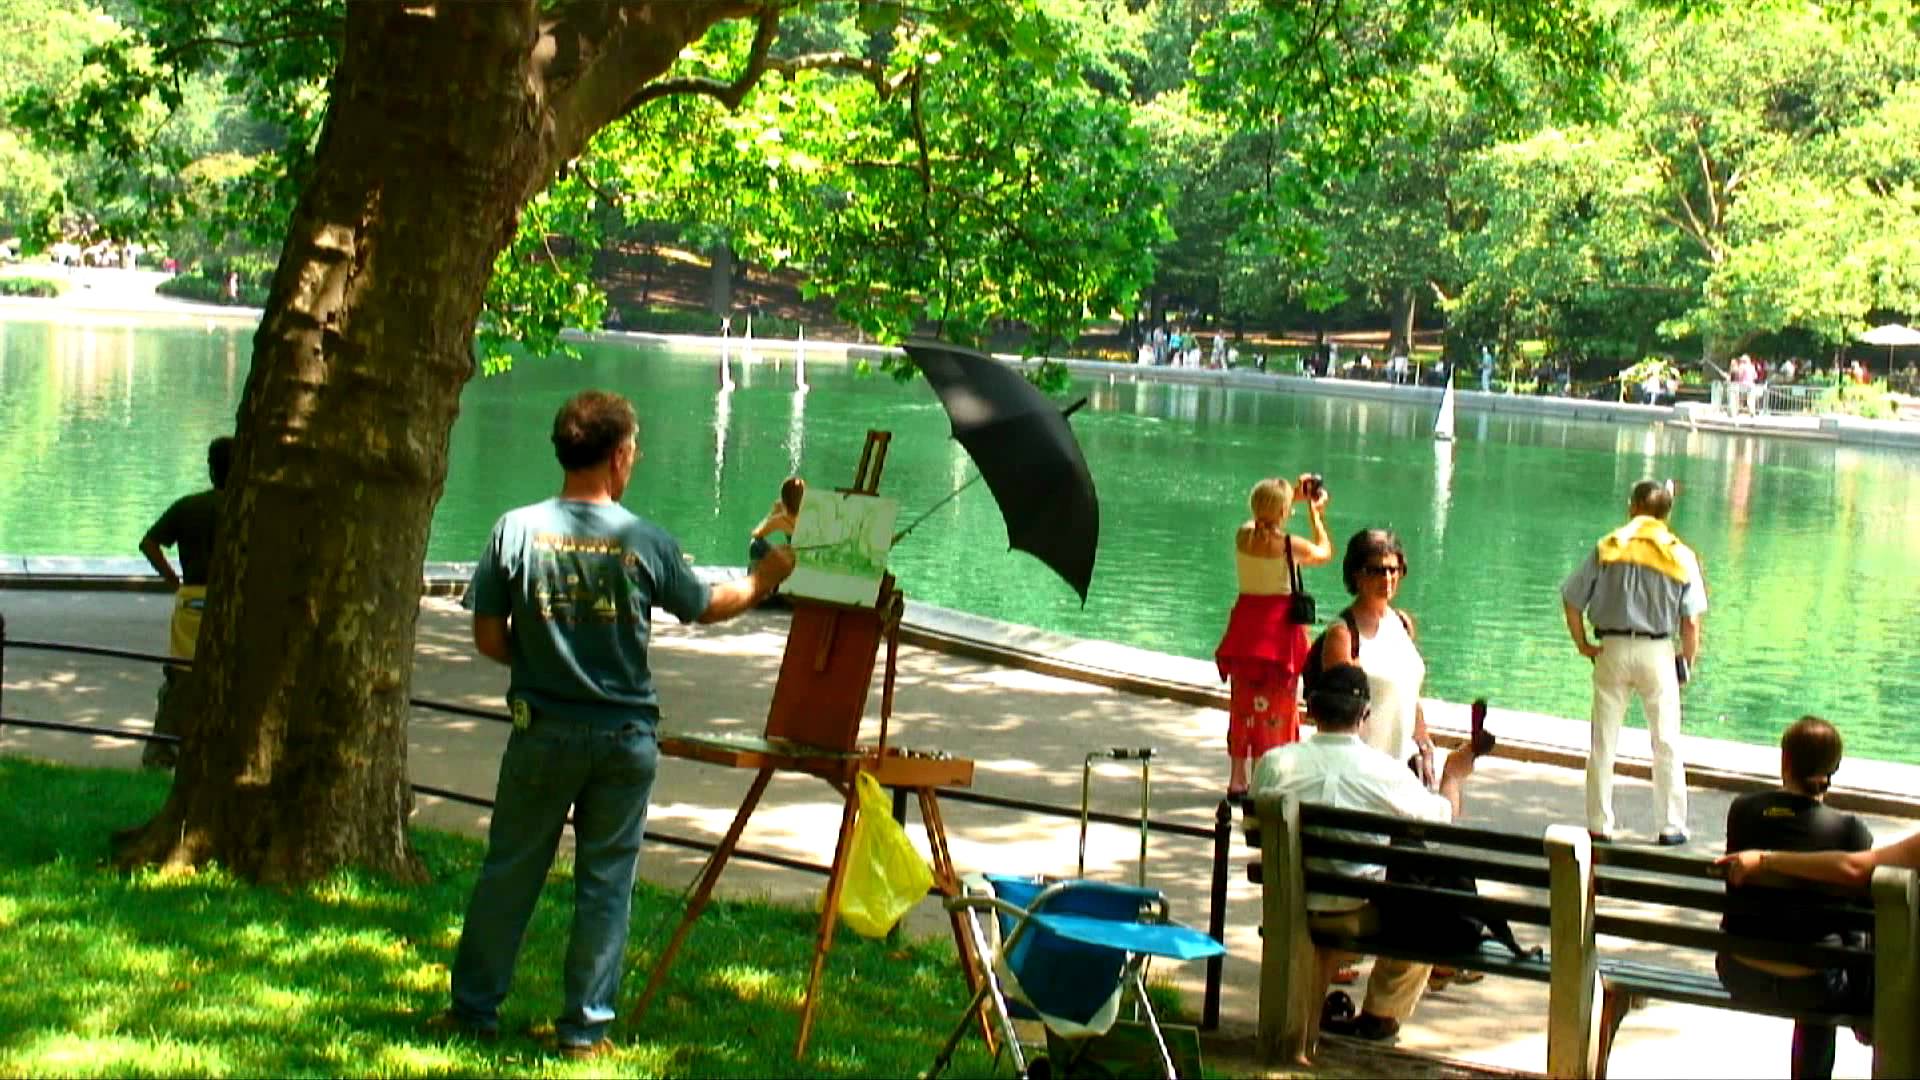 Man painting a scene of a pond in Central Park NYC. - YouTube